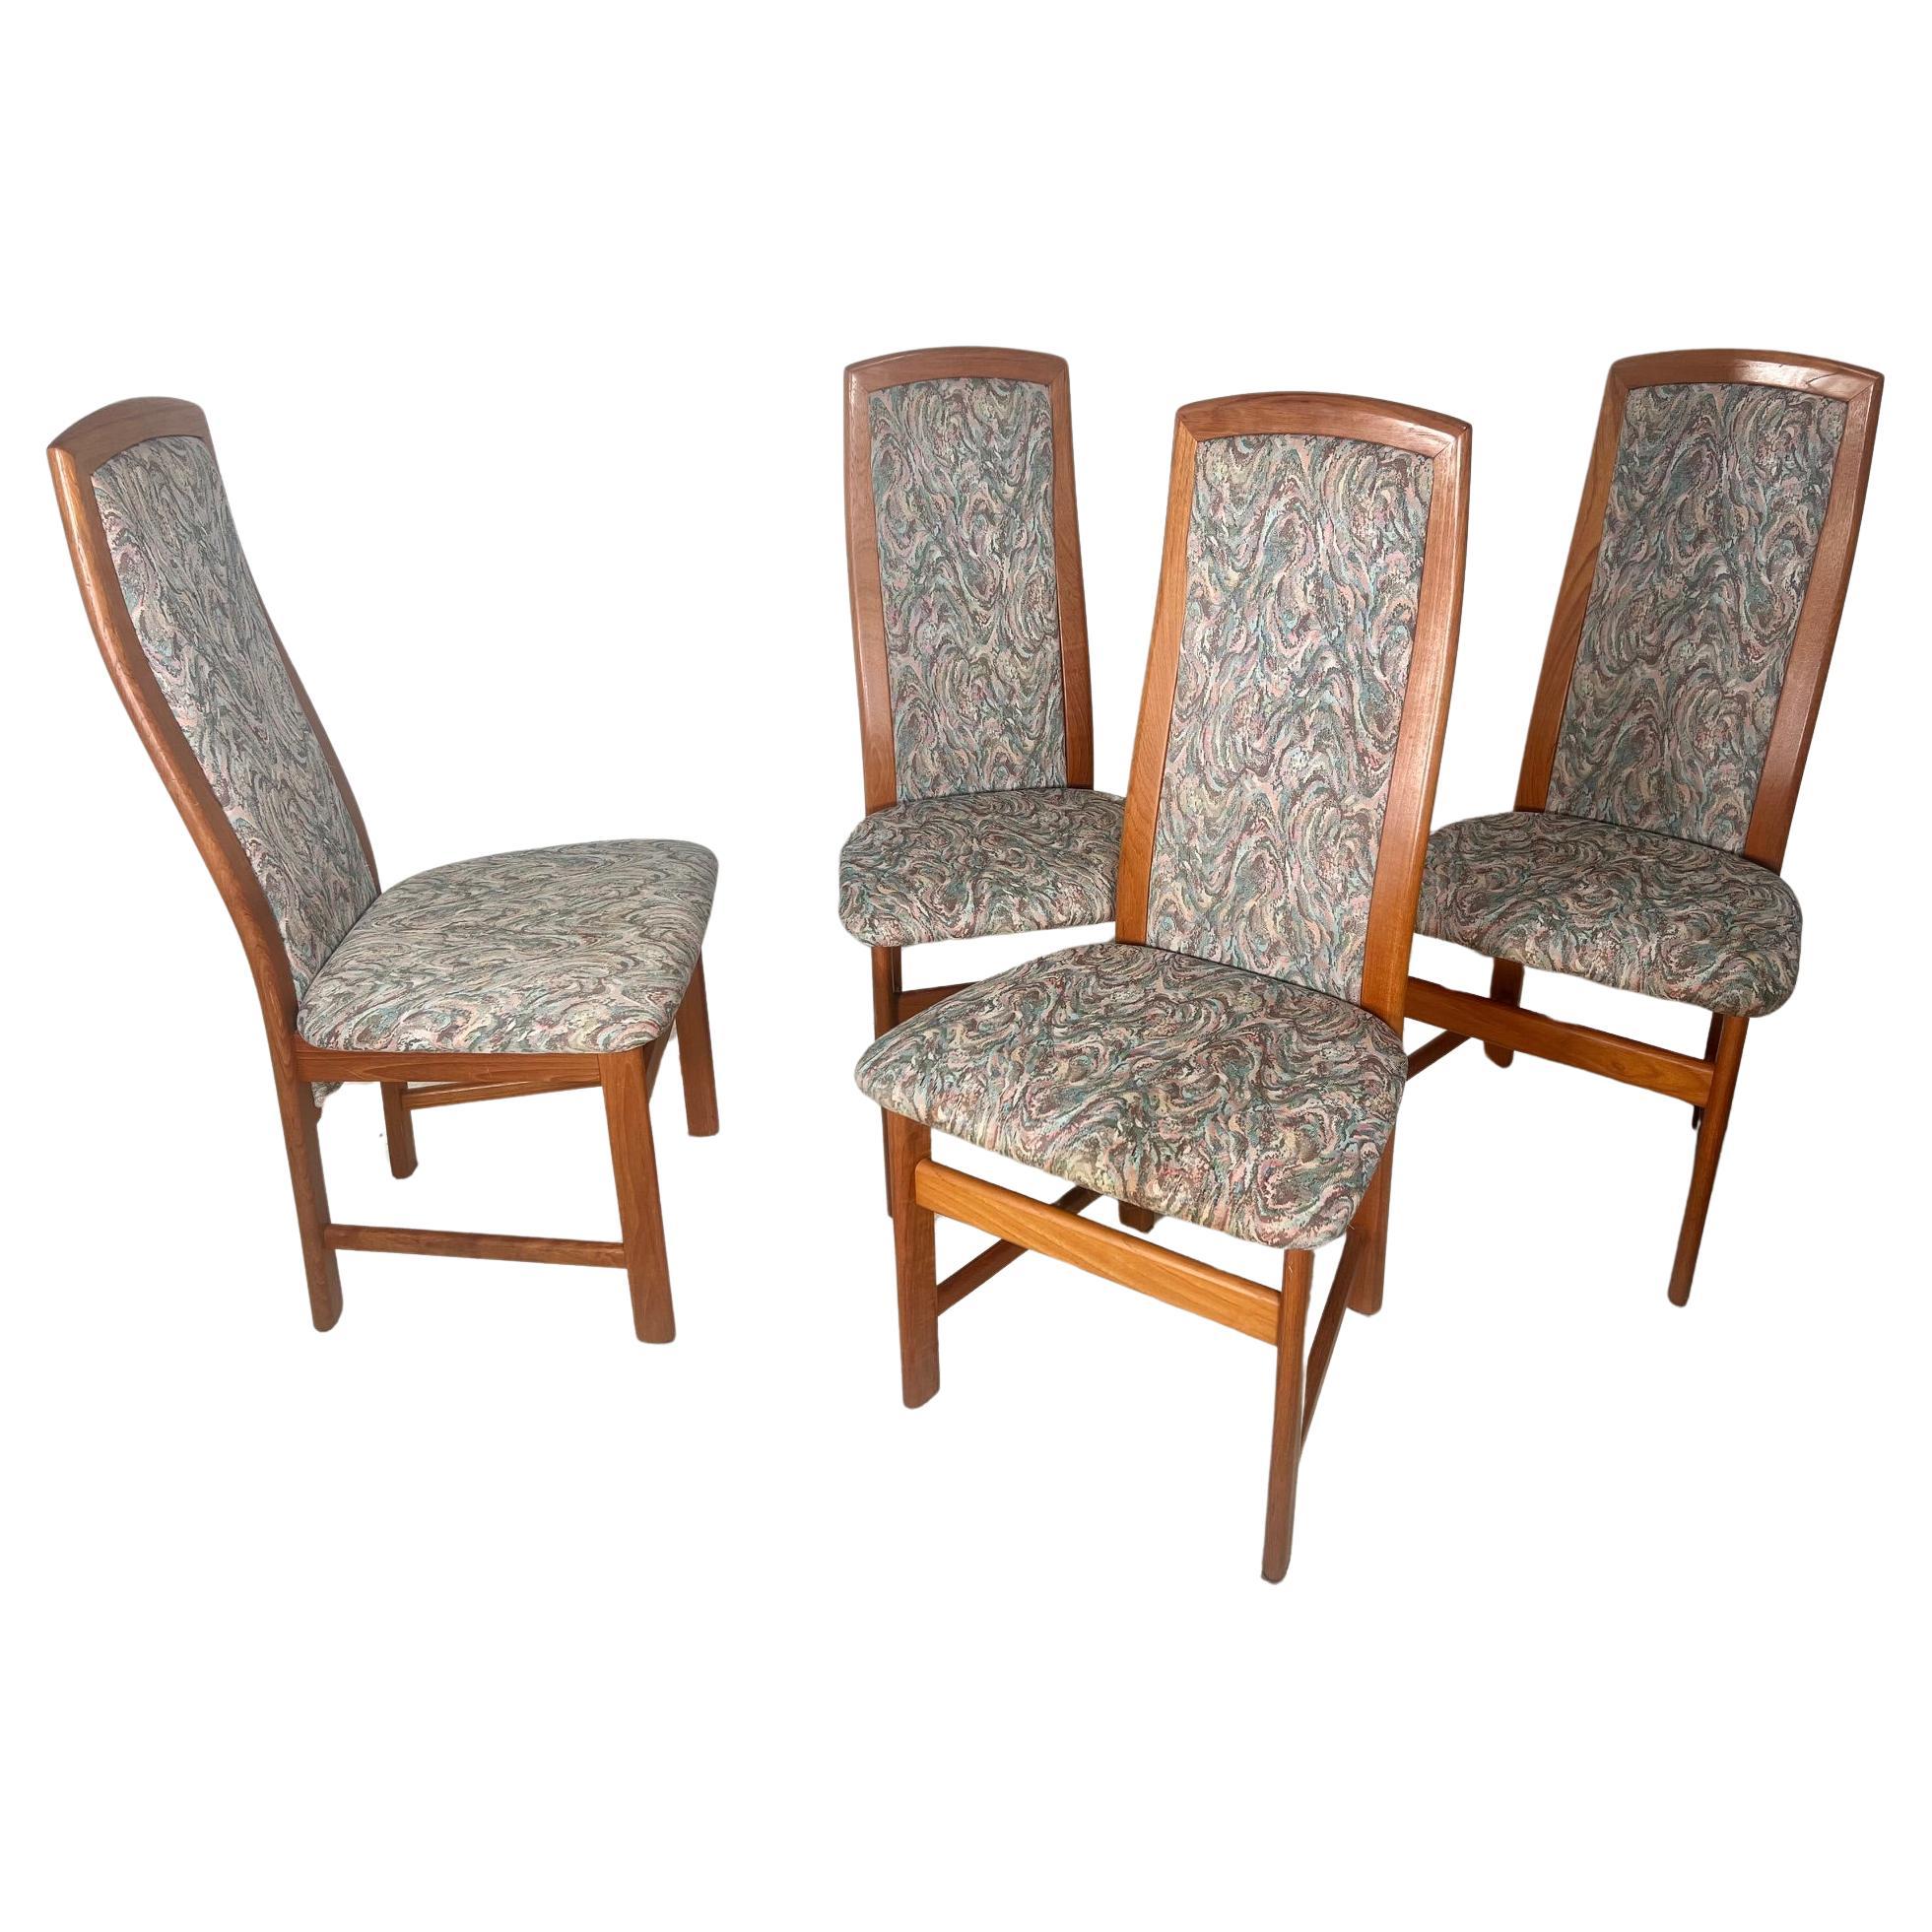 Set of 4 Mid Century  Danish Modern Teak Dining Chairs By Nordic Furniture 